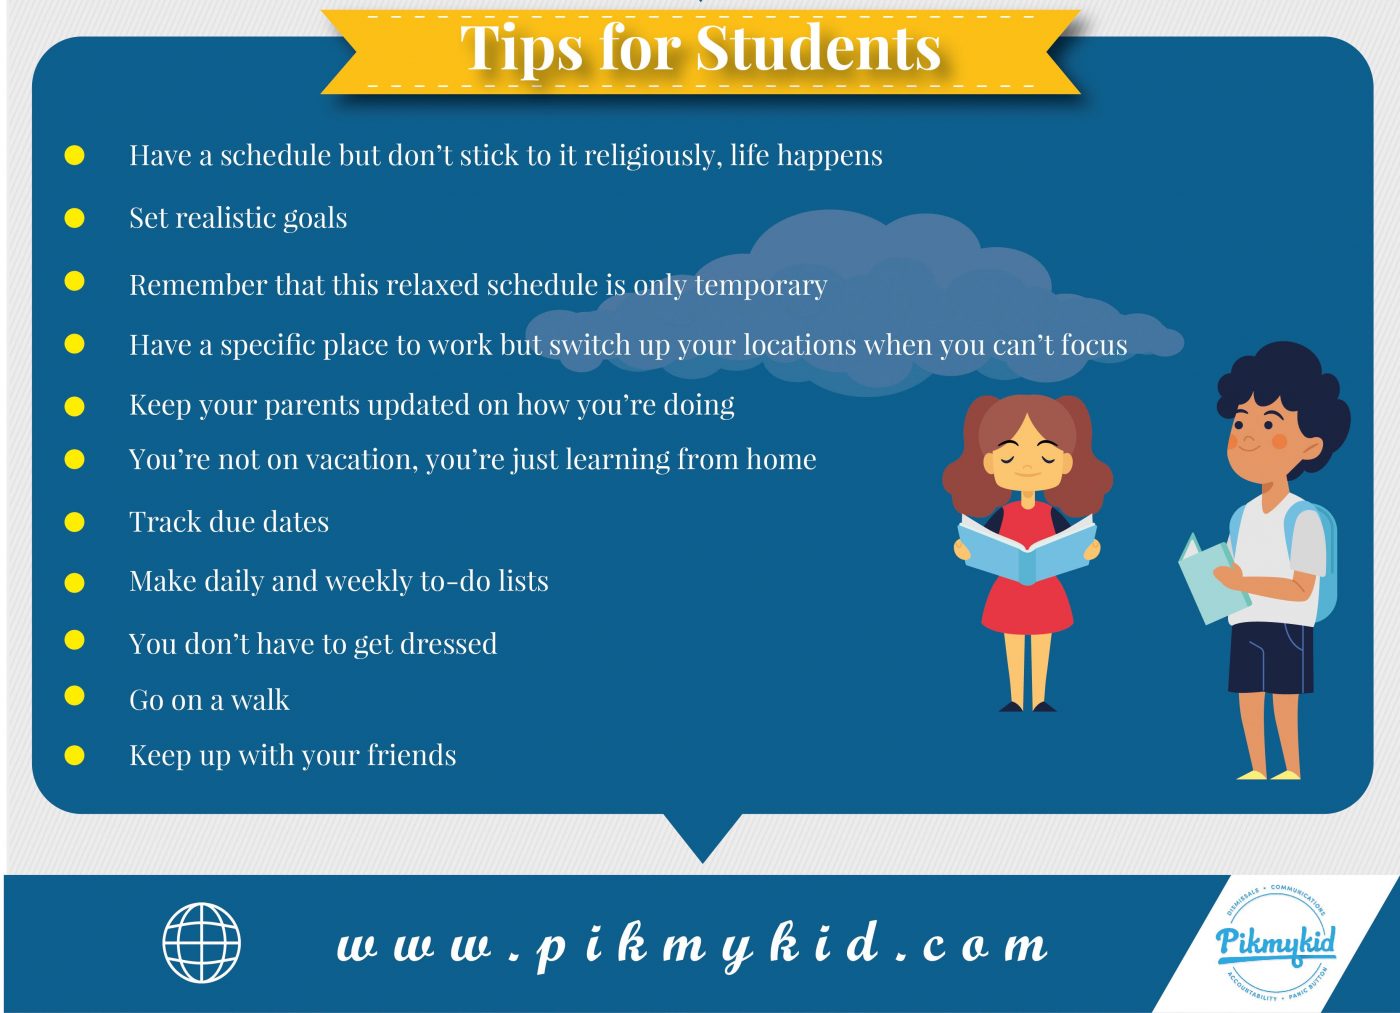 e-learning transition tips for students graphic